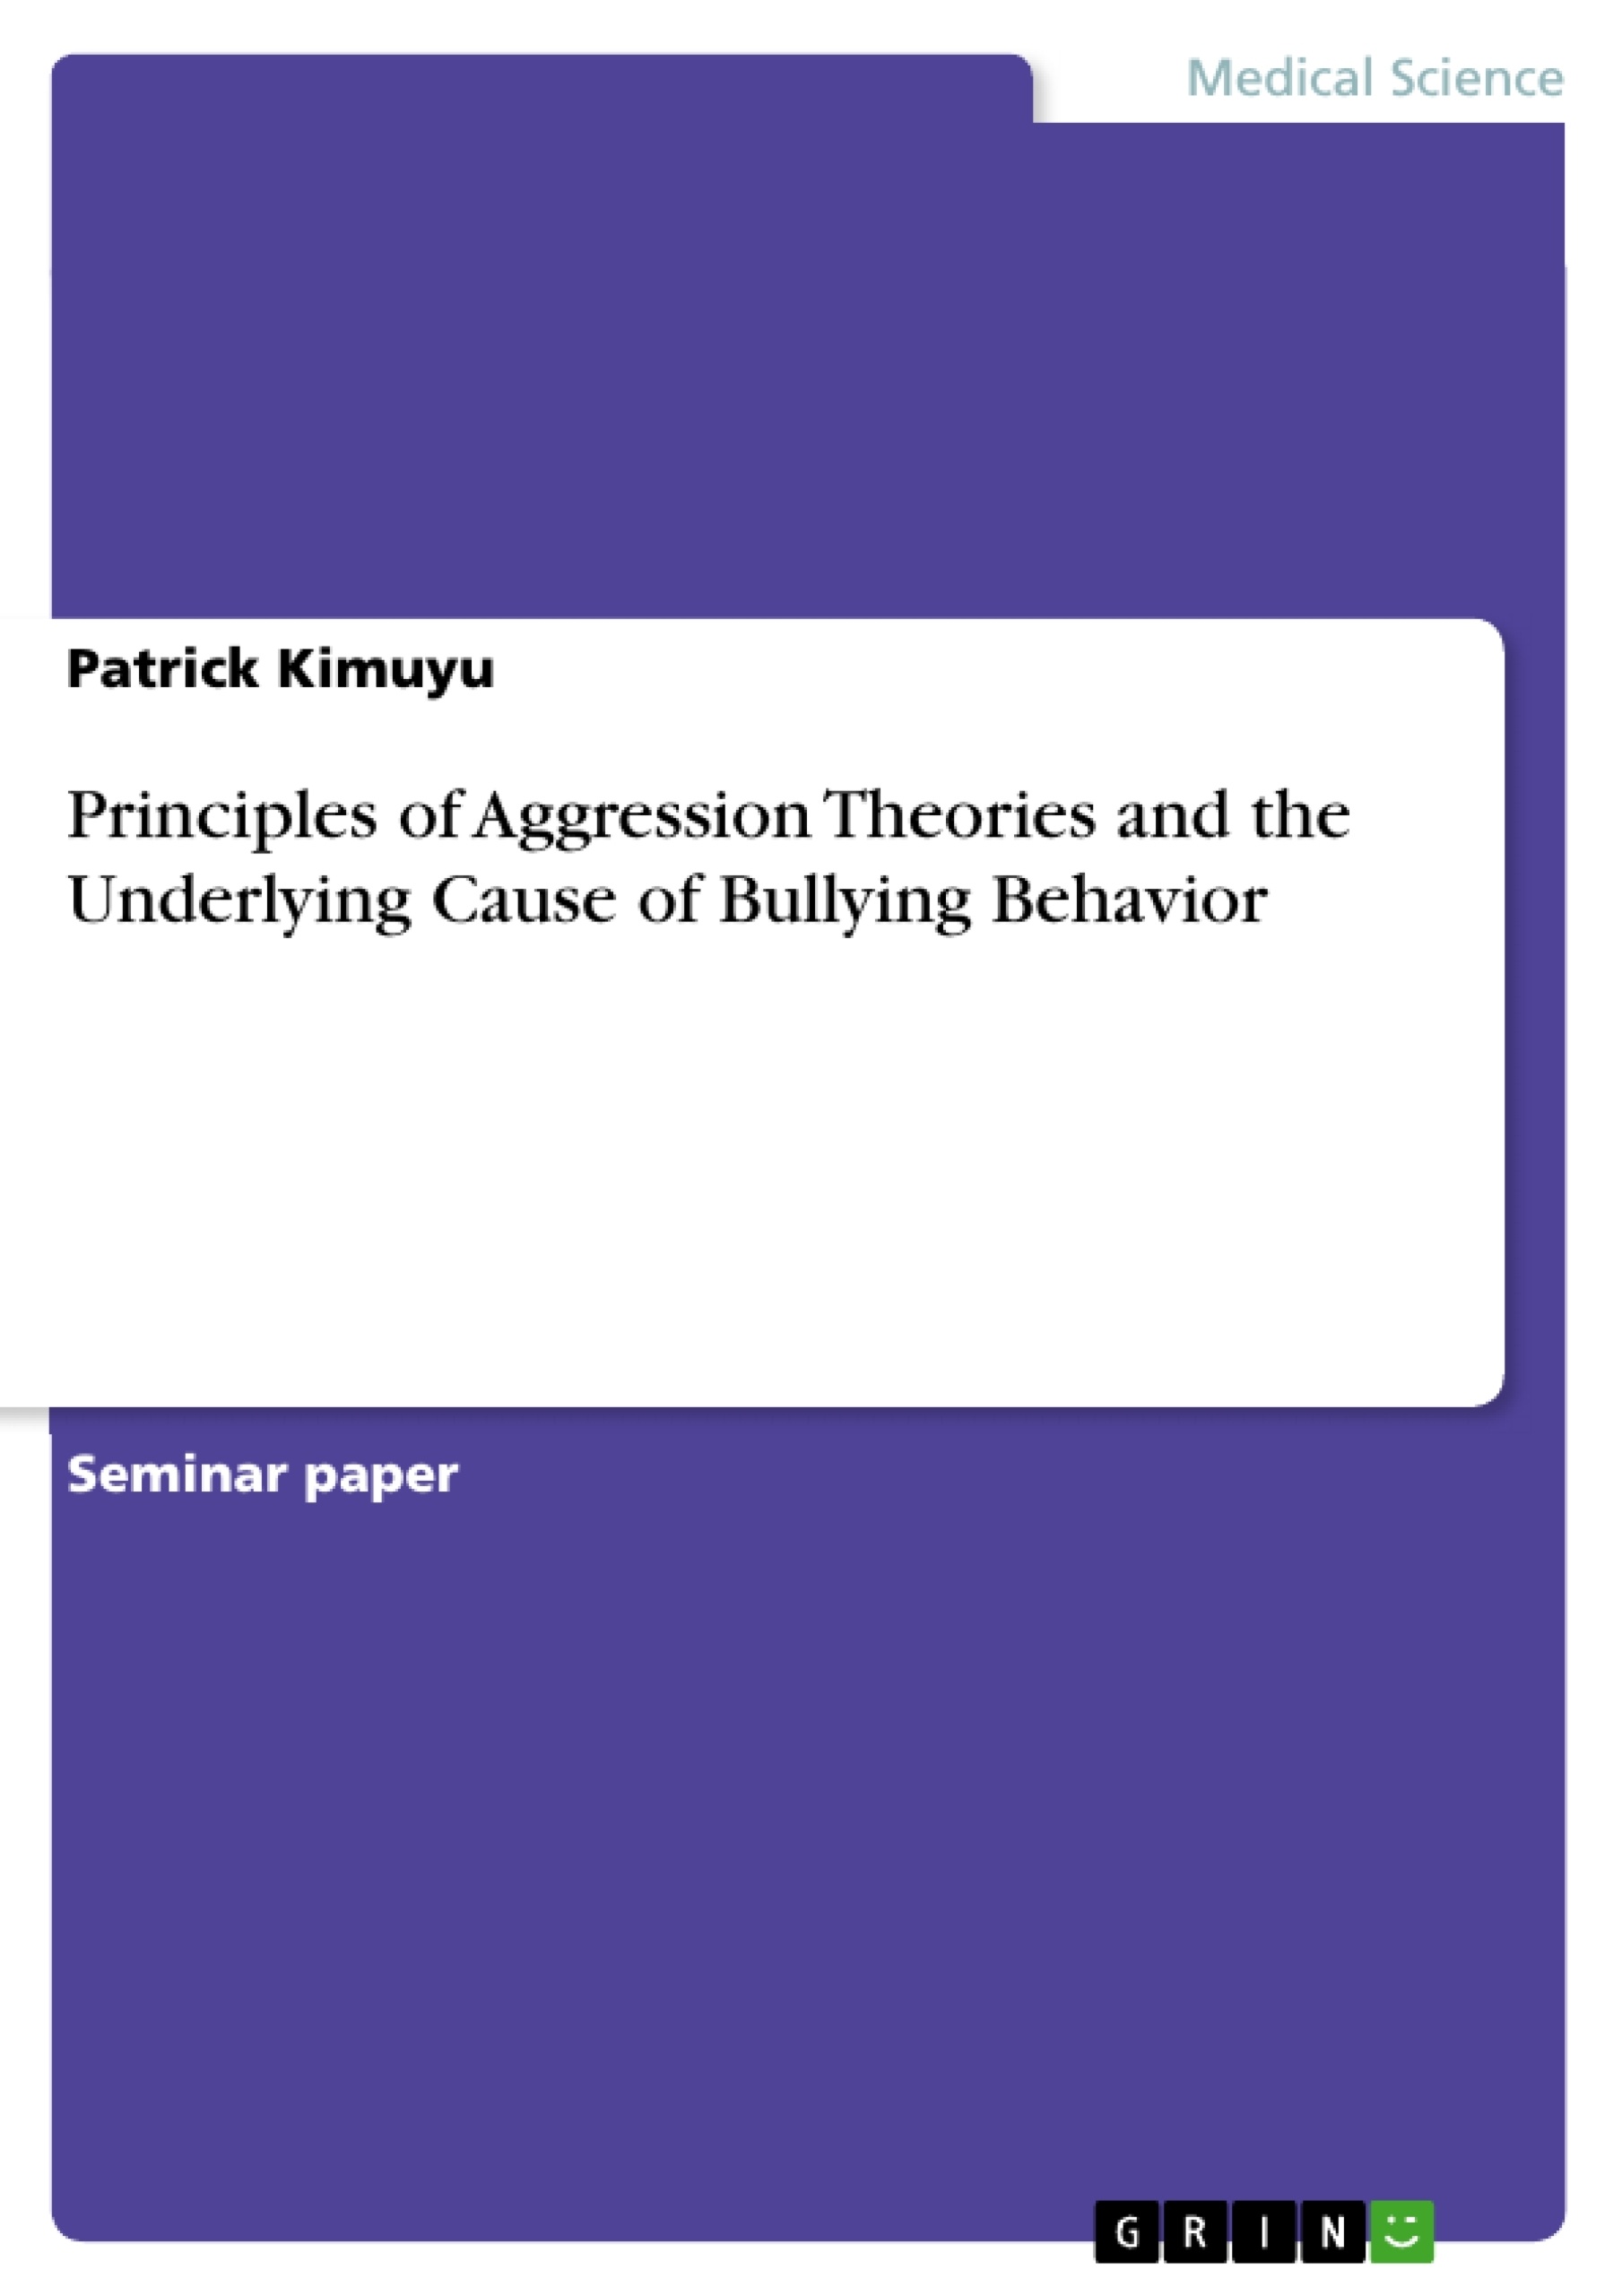 Título: Principles of Aggression Theories and the Underlying Cause of Bullying Behavior